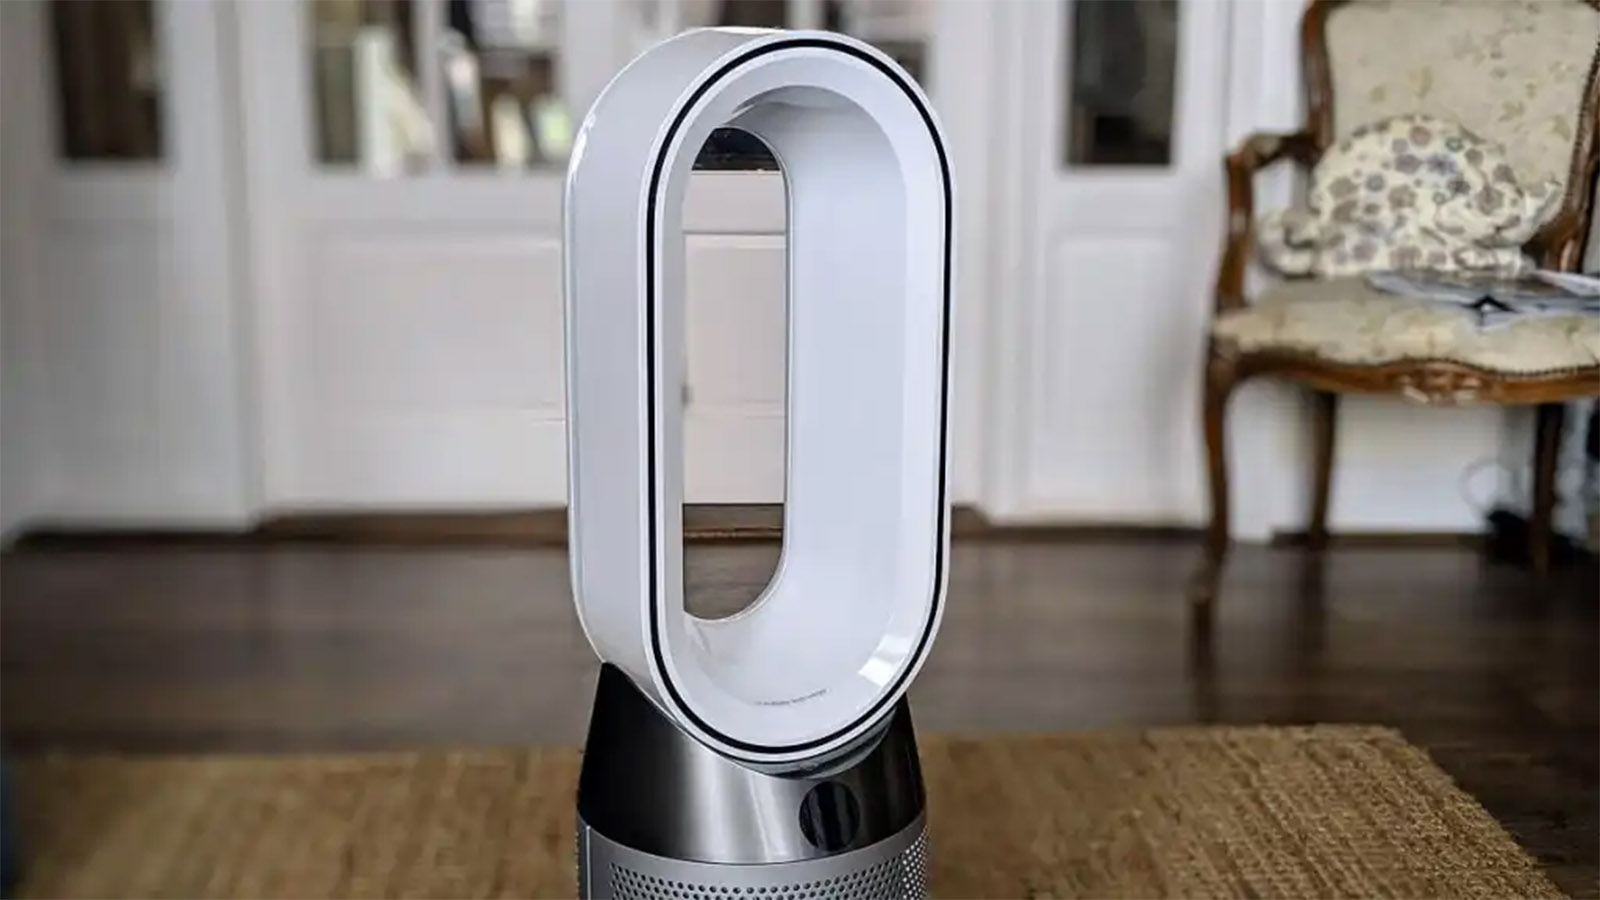  Dyson Pure Hot + Cool - Best multifunctional purifier